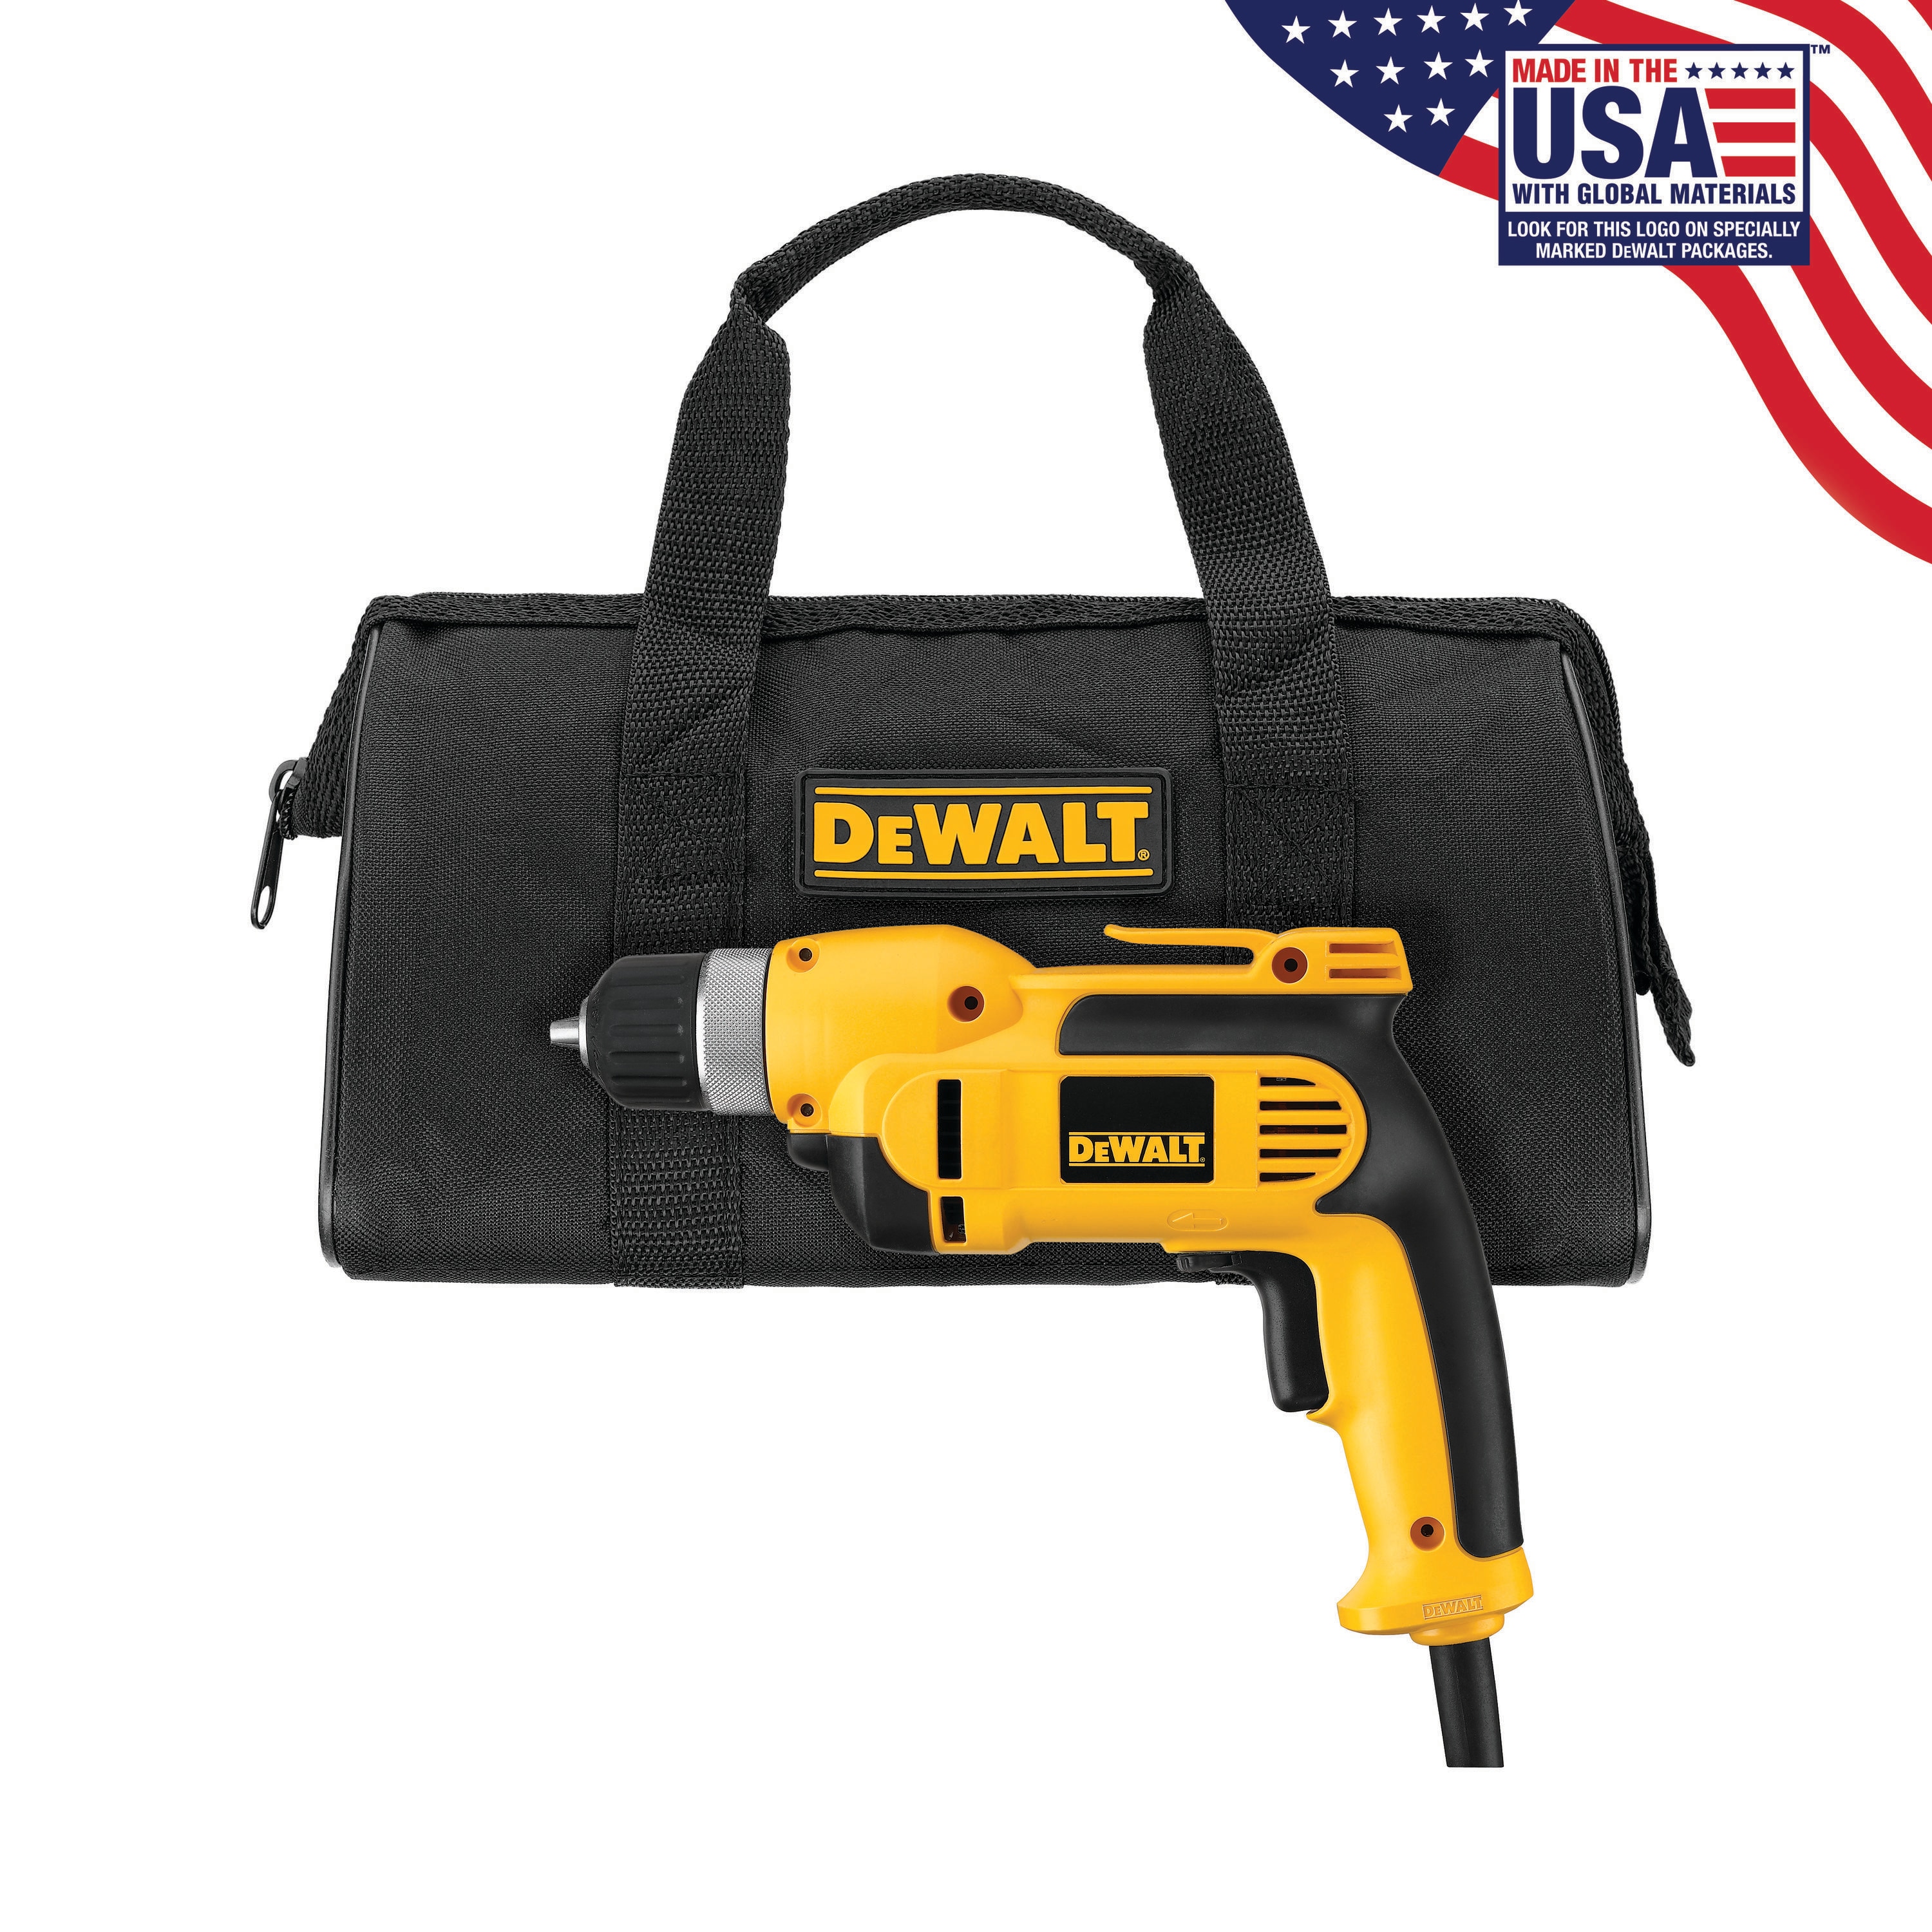 DEWALT 3/8-in Corded Drill (Tool in Drills department at Lowes.com